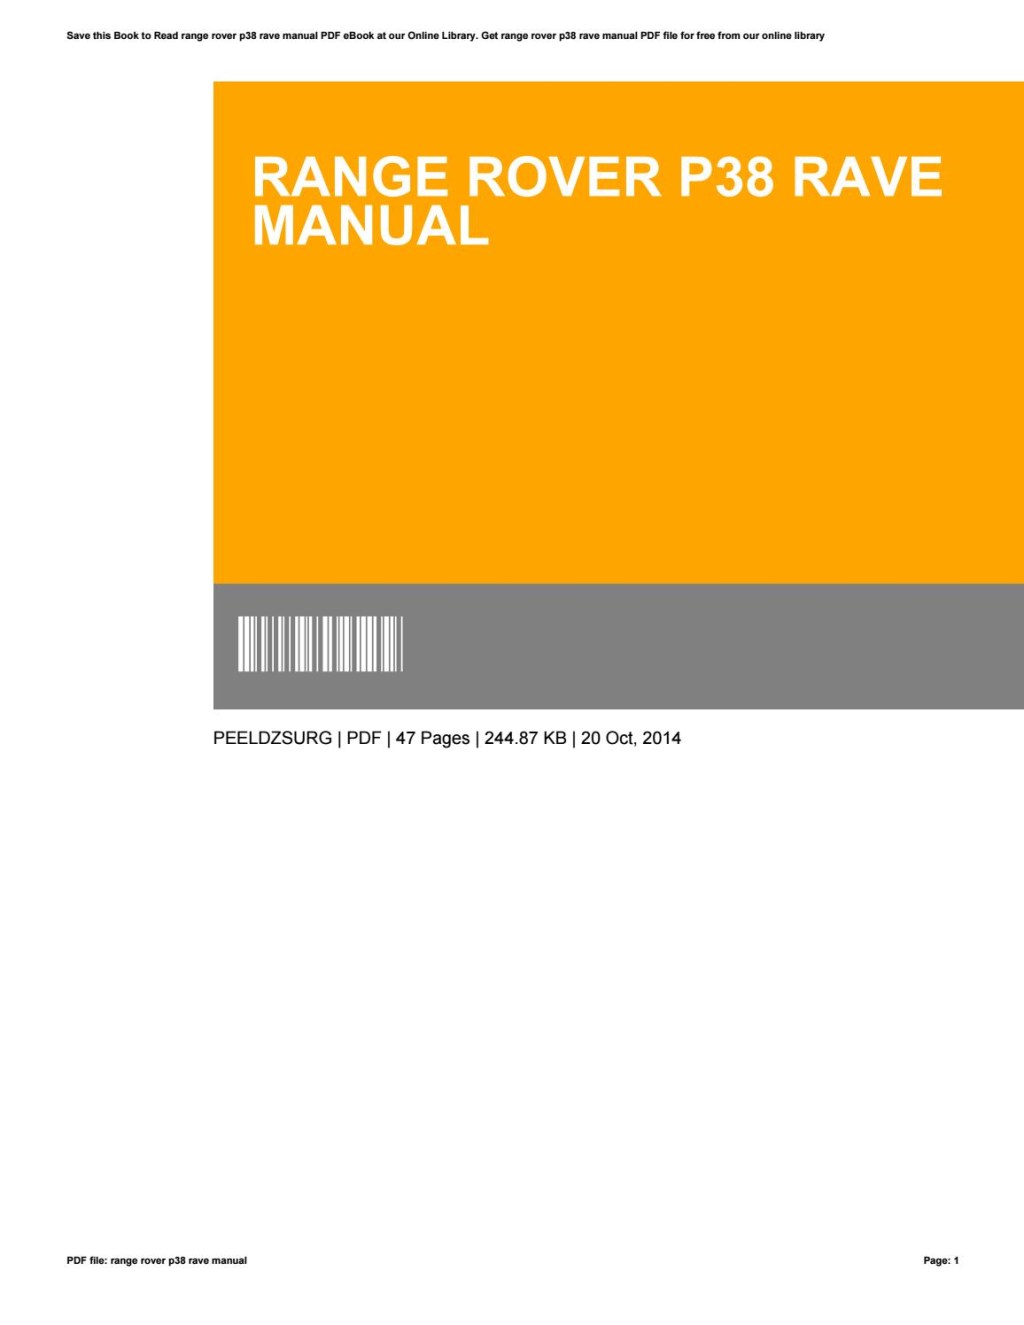 Picture of: Range rover p rave manual by n – Issuu